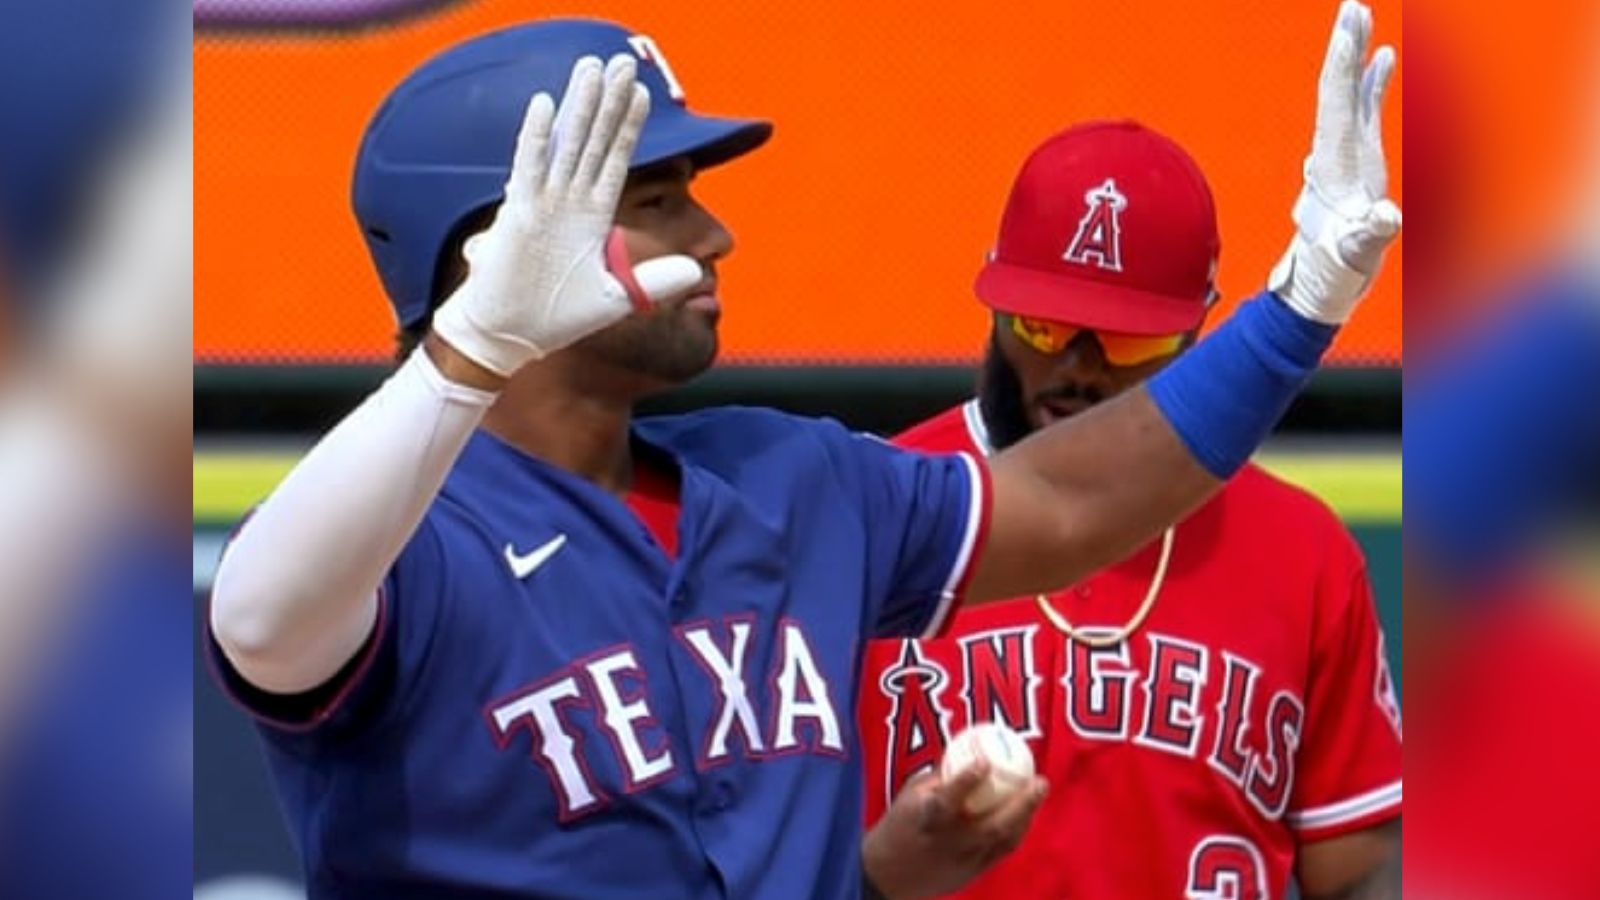 Rangers Takes Series 3-1 Over Angels